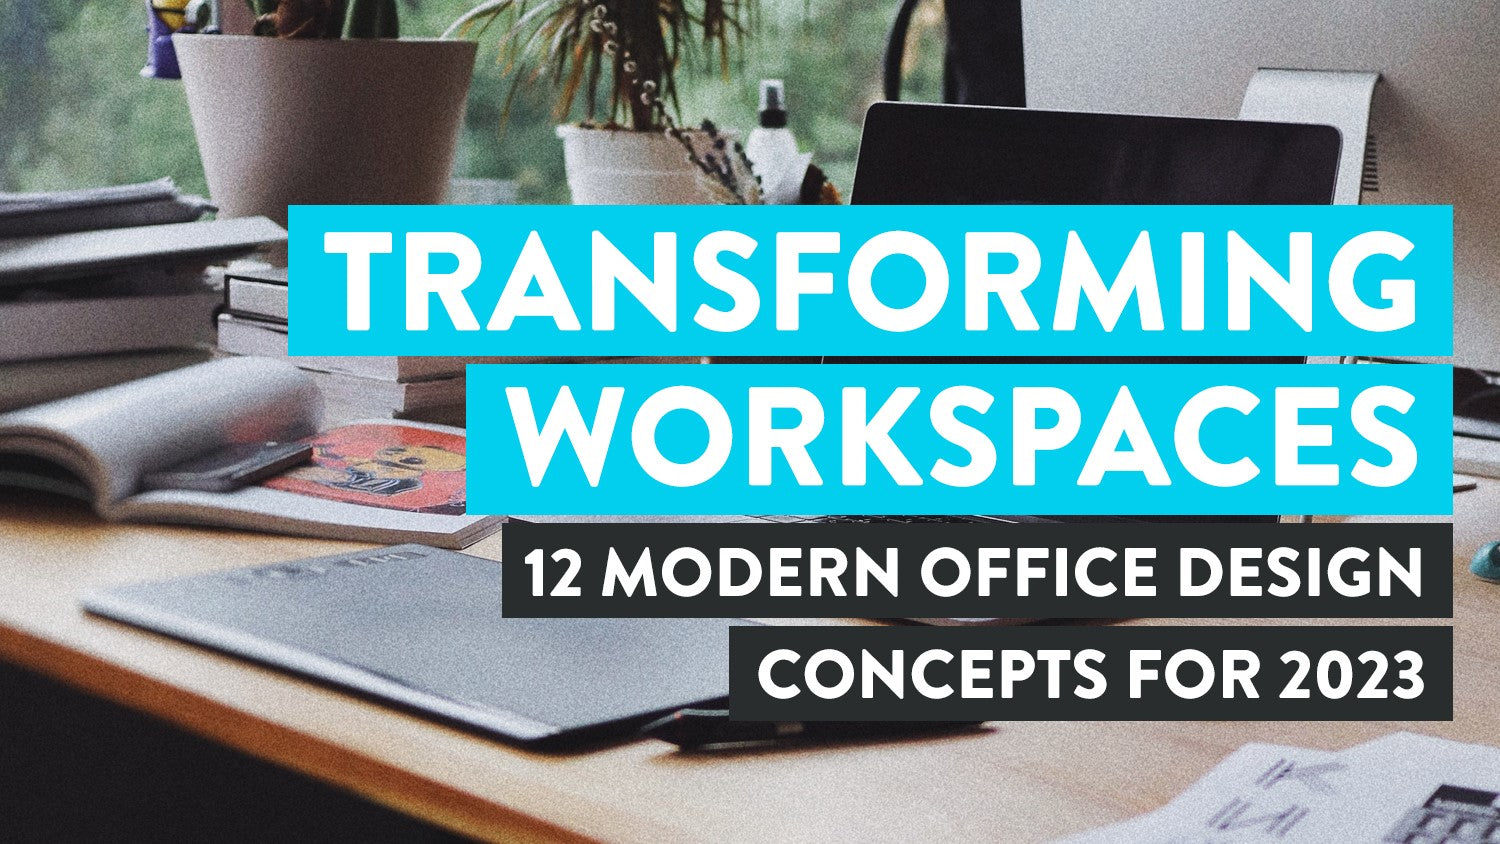 Future Workspace: Office Design Trends 2023 - Synergy Creativ